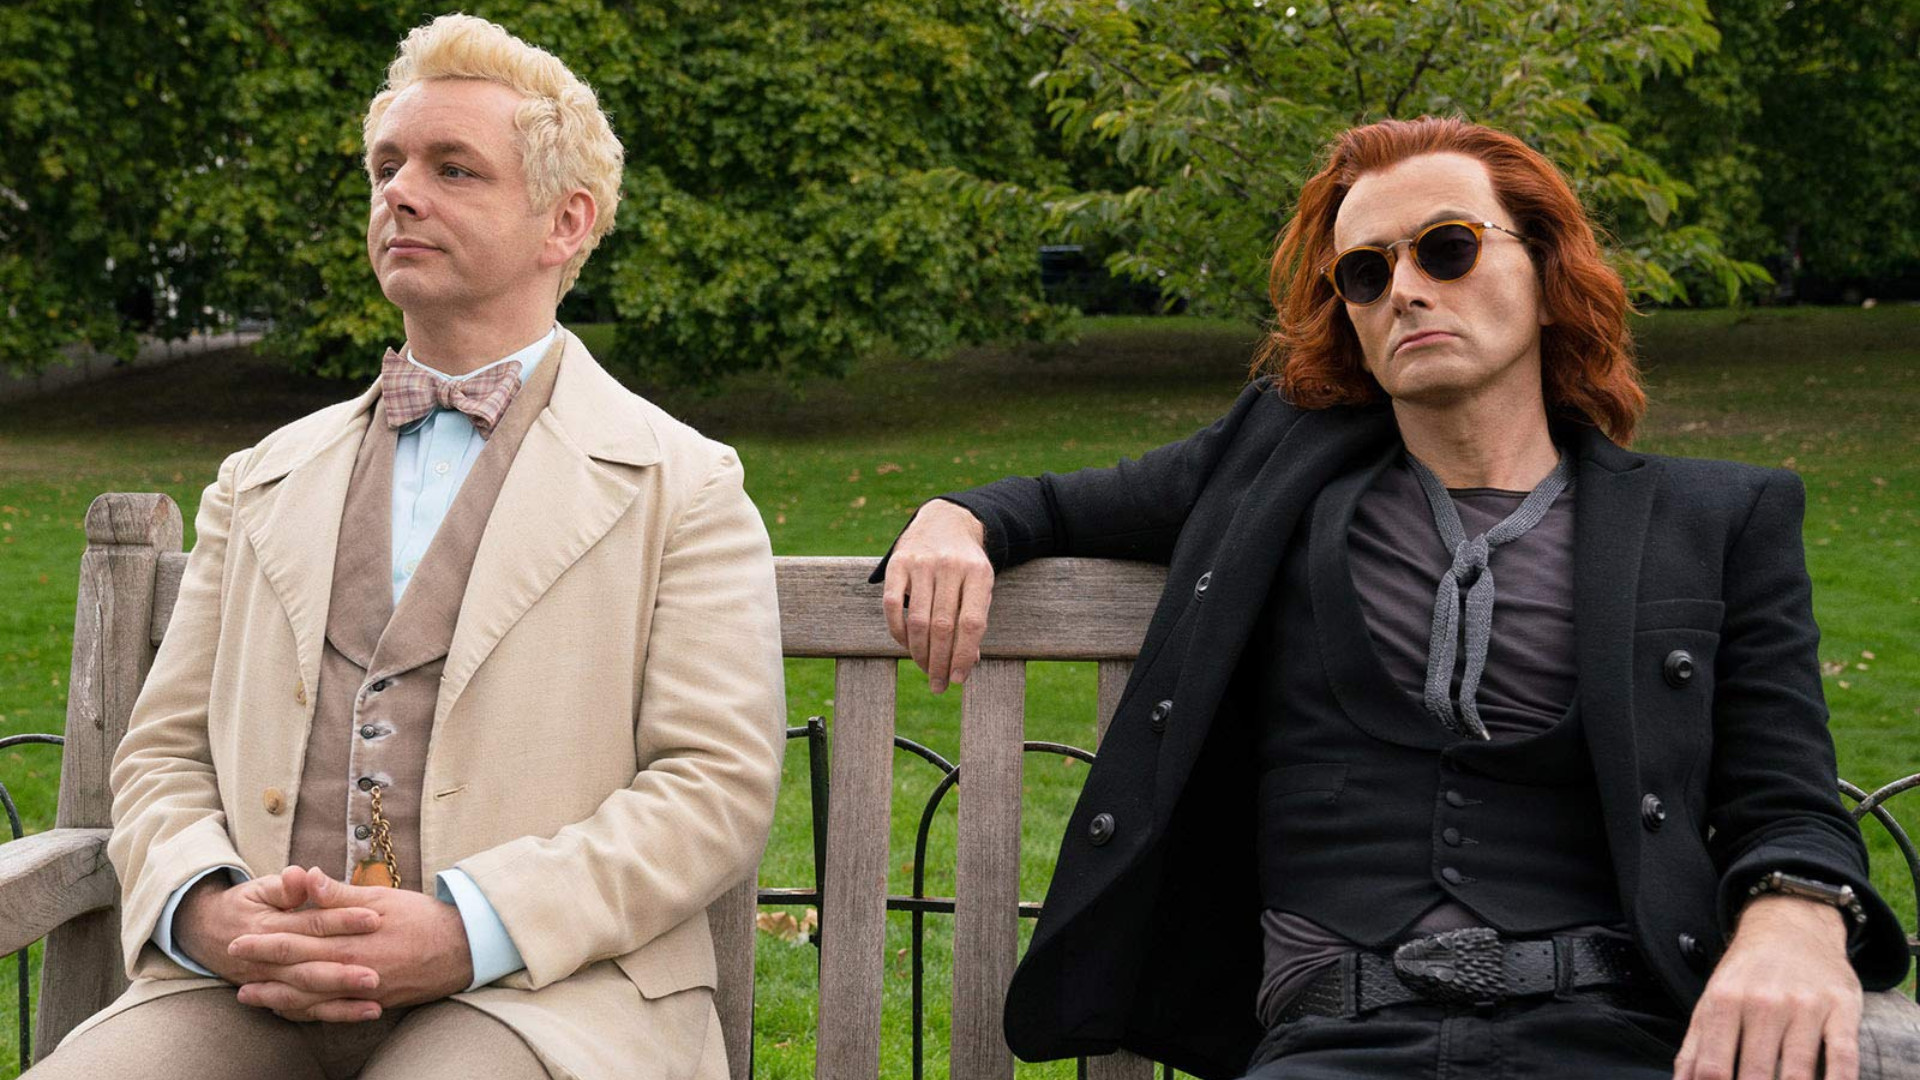 Good Omens on BBC 2, Release, time, cast, about, trailer